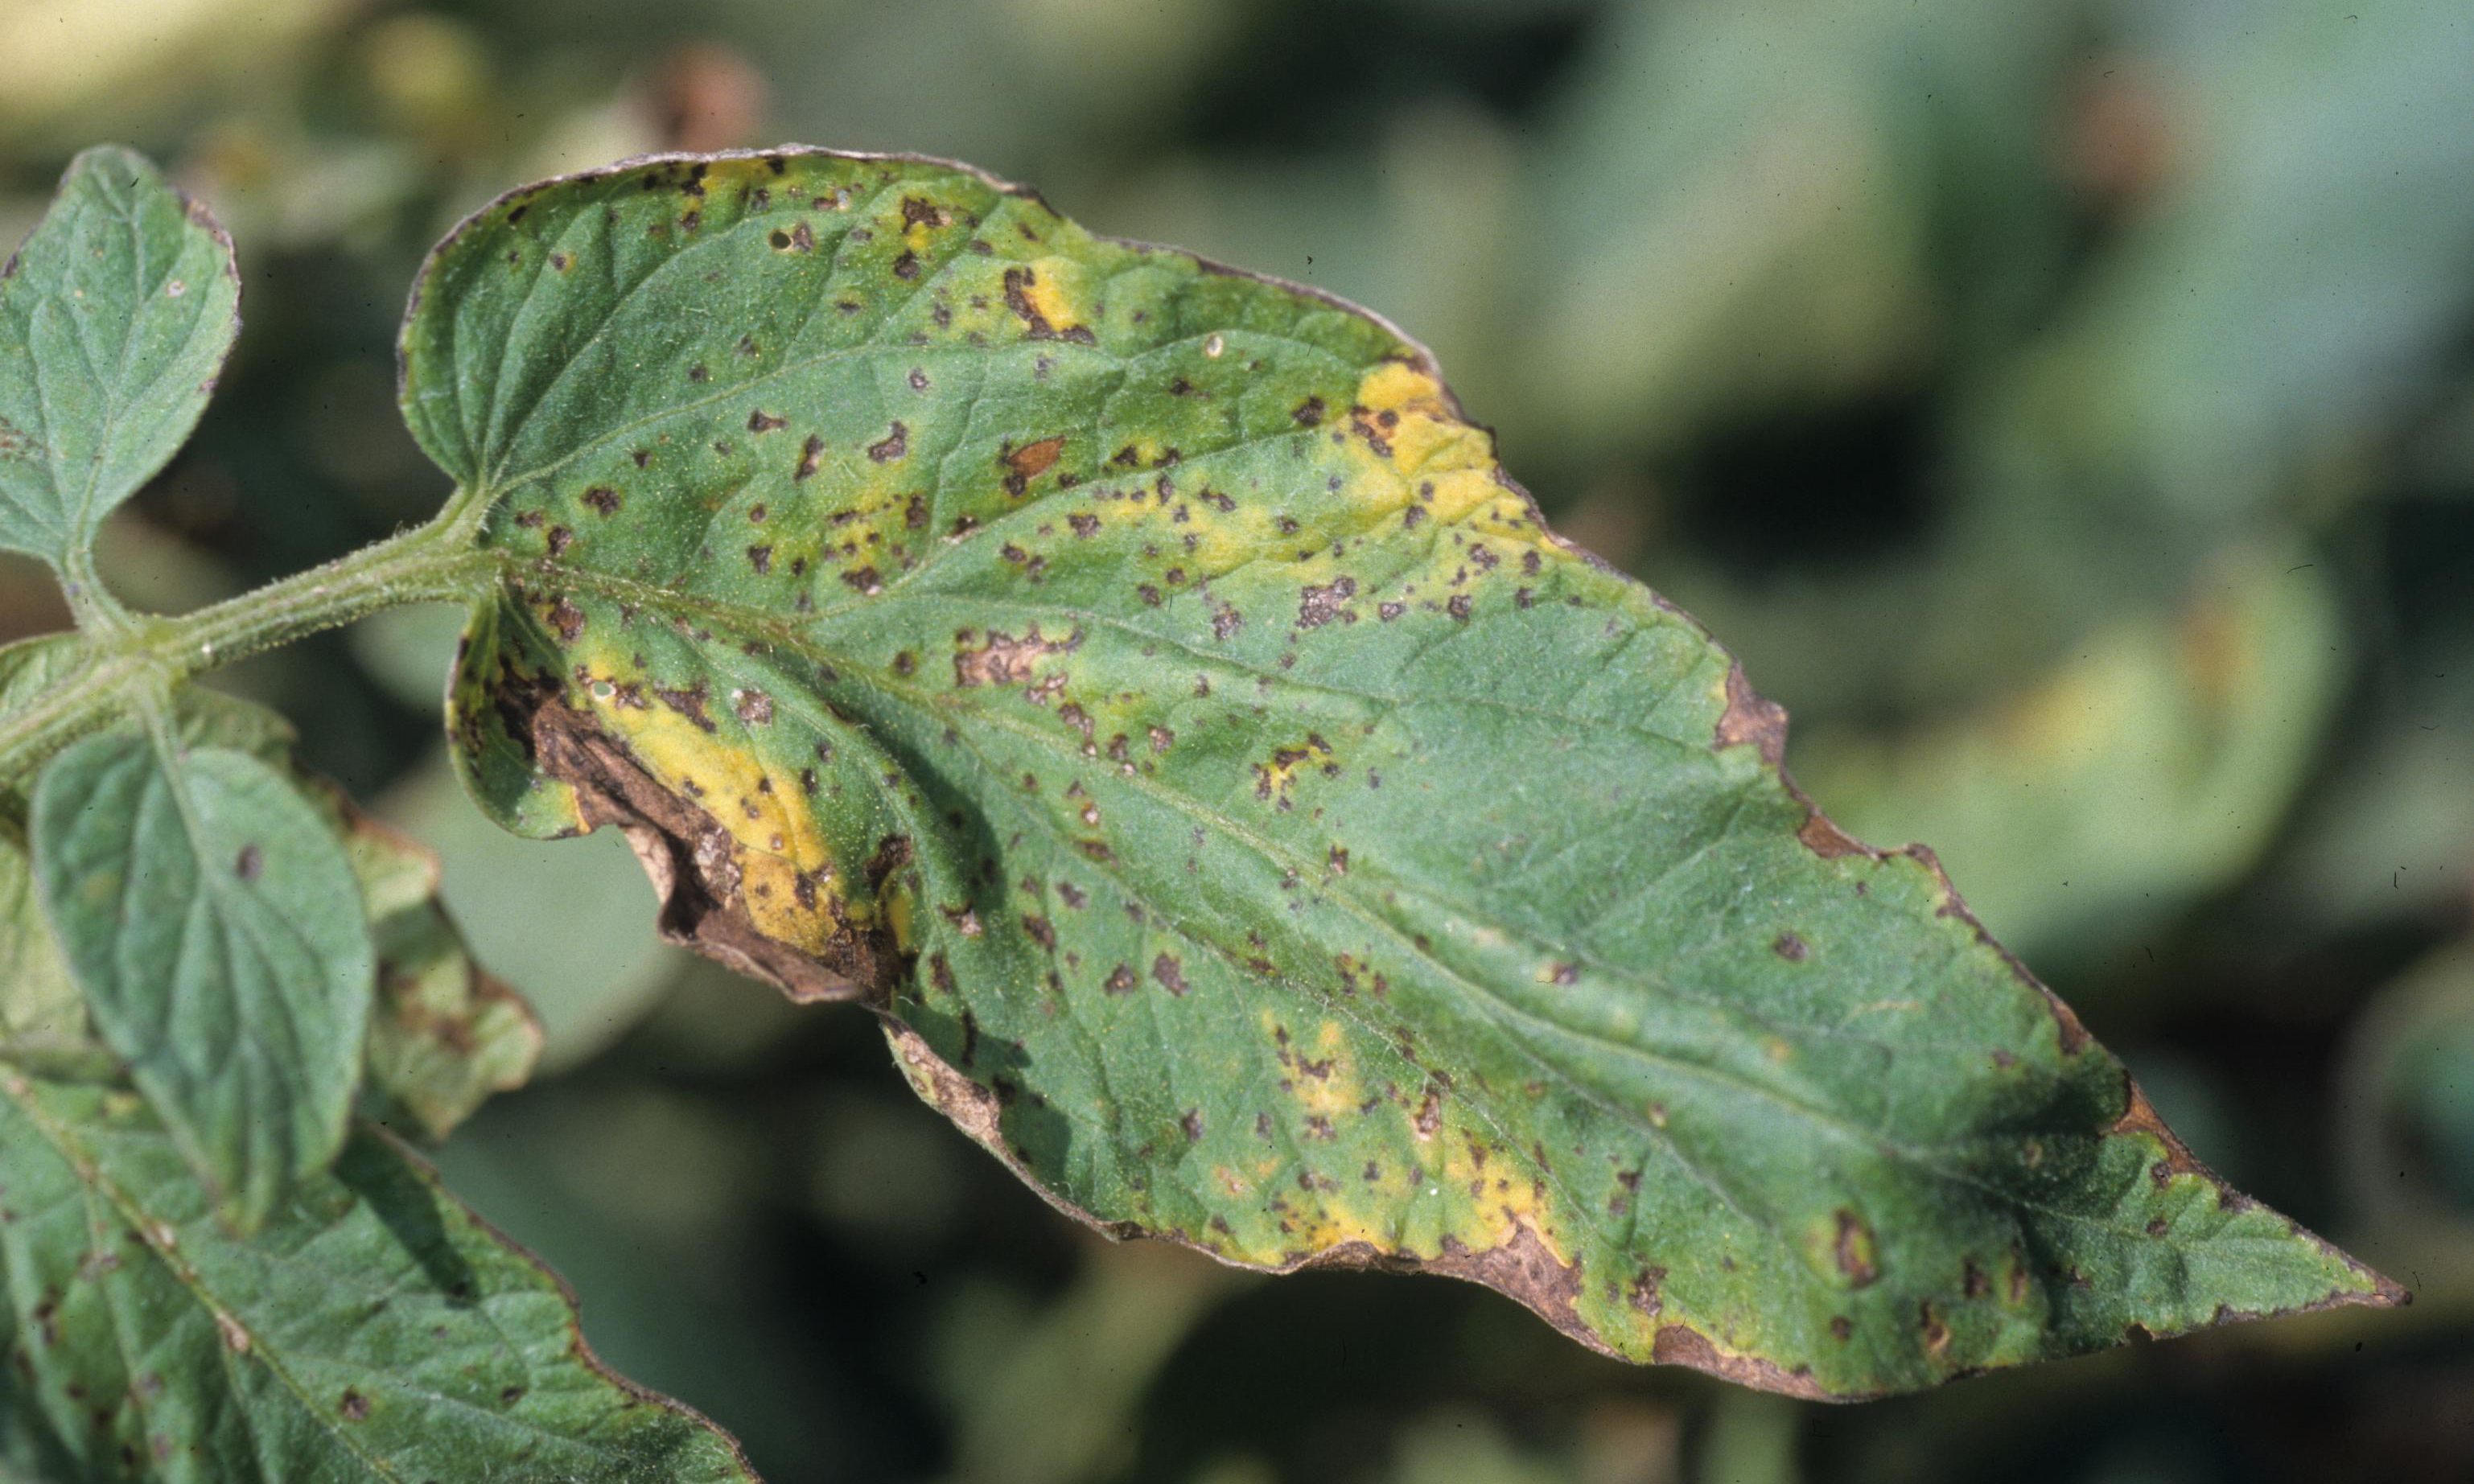 Bacterial speck on tomato foliage.